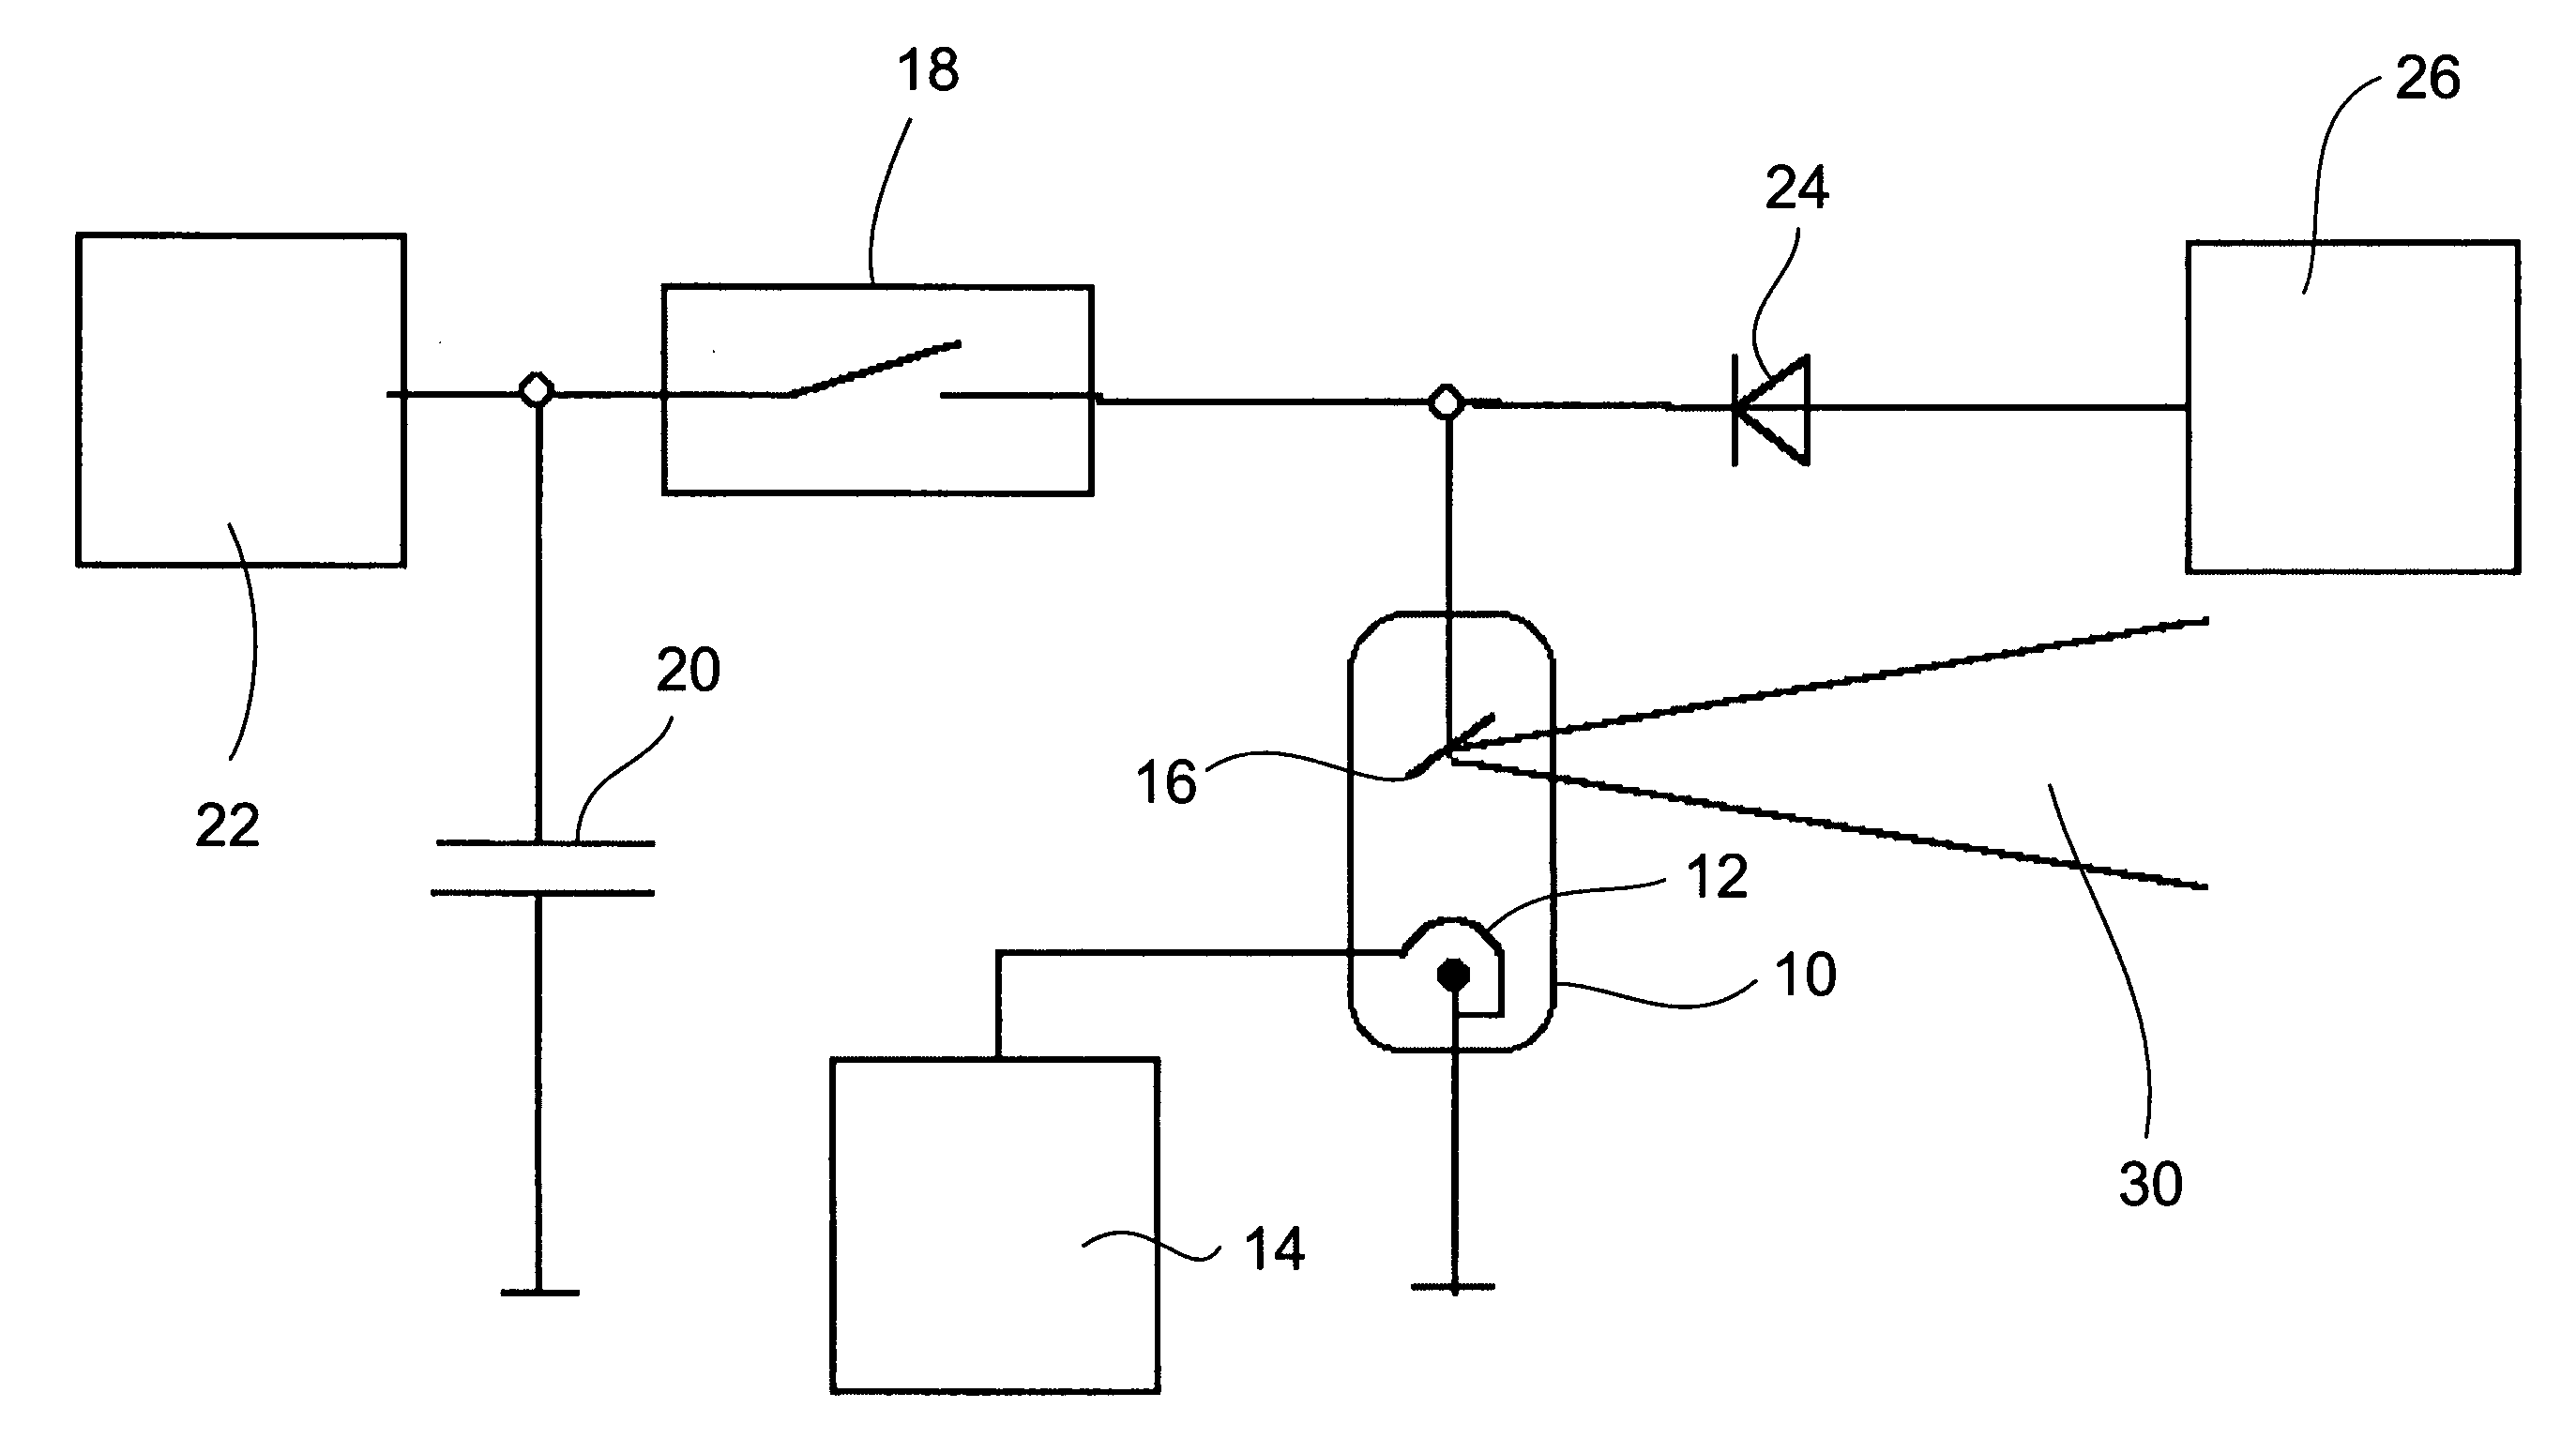 X-ray apparatus for generating short x-ray pulses, and inspecting device operating by means of such an x-ray apparatus